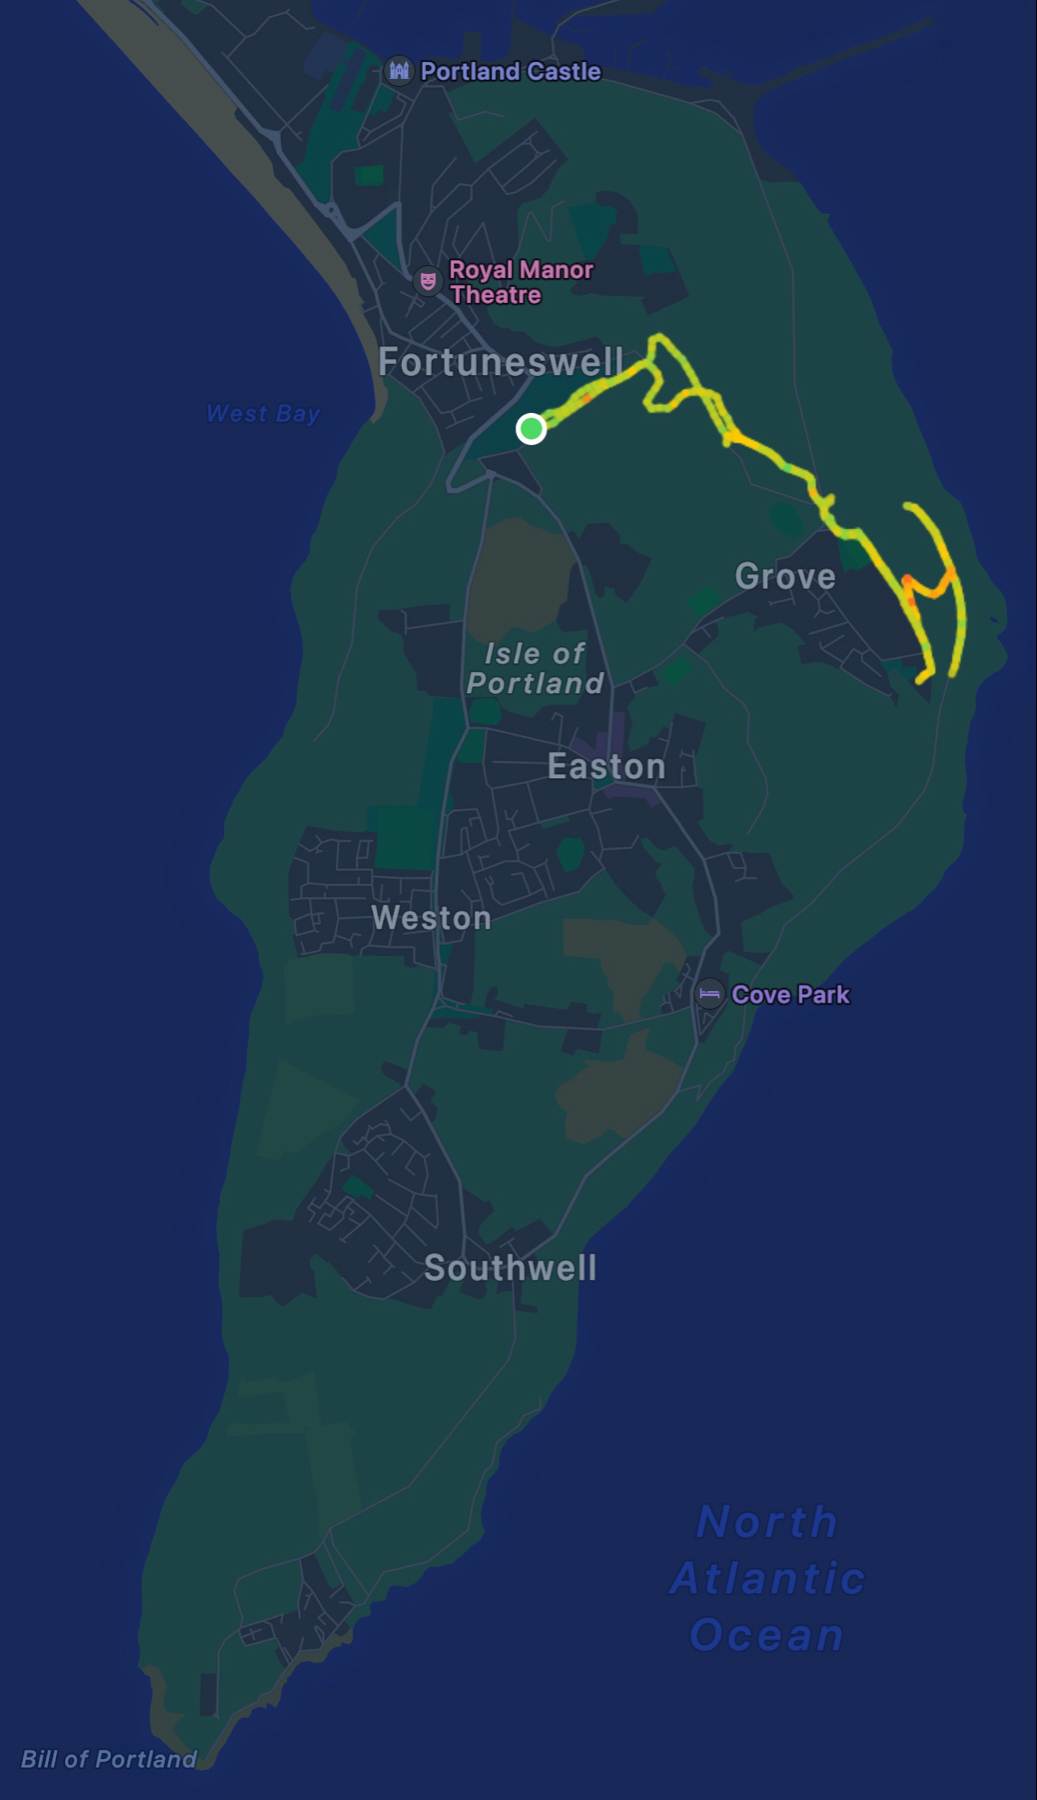 A map of Portland island showing a walking route